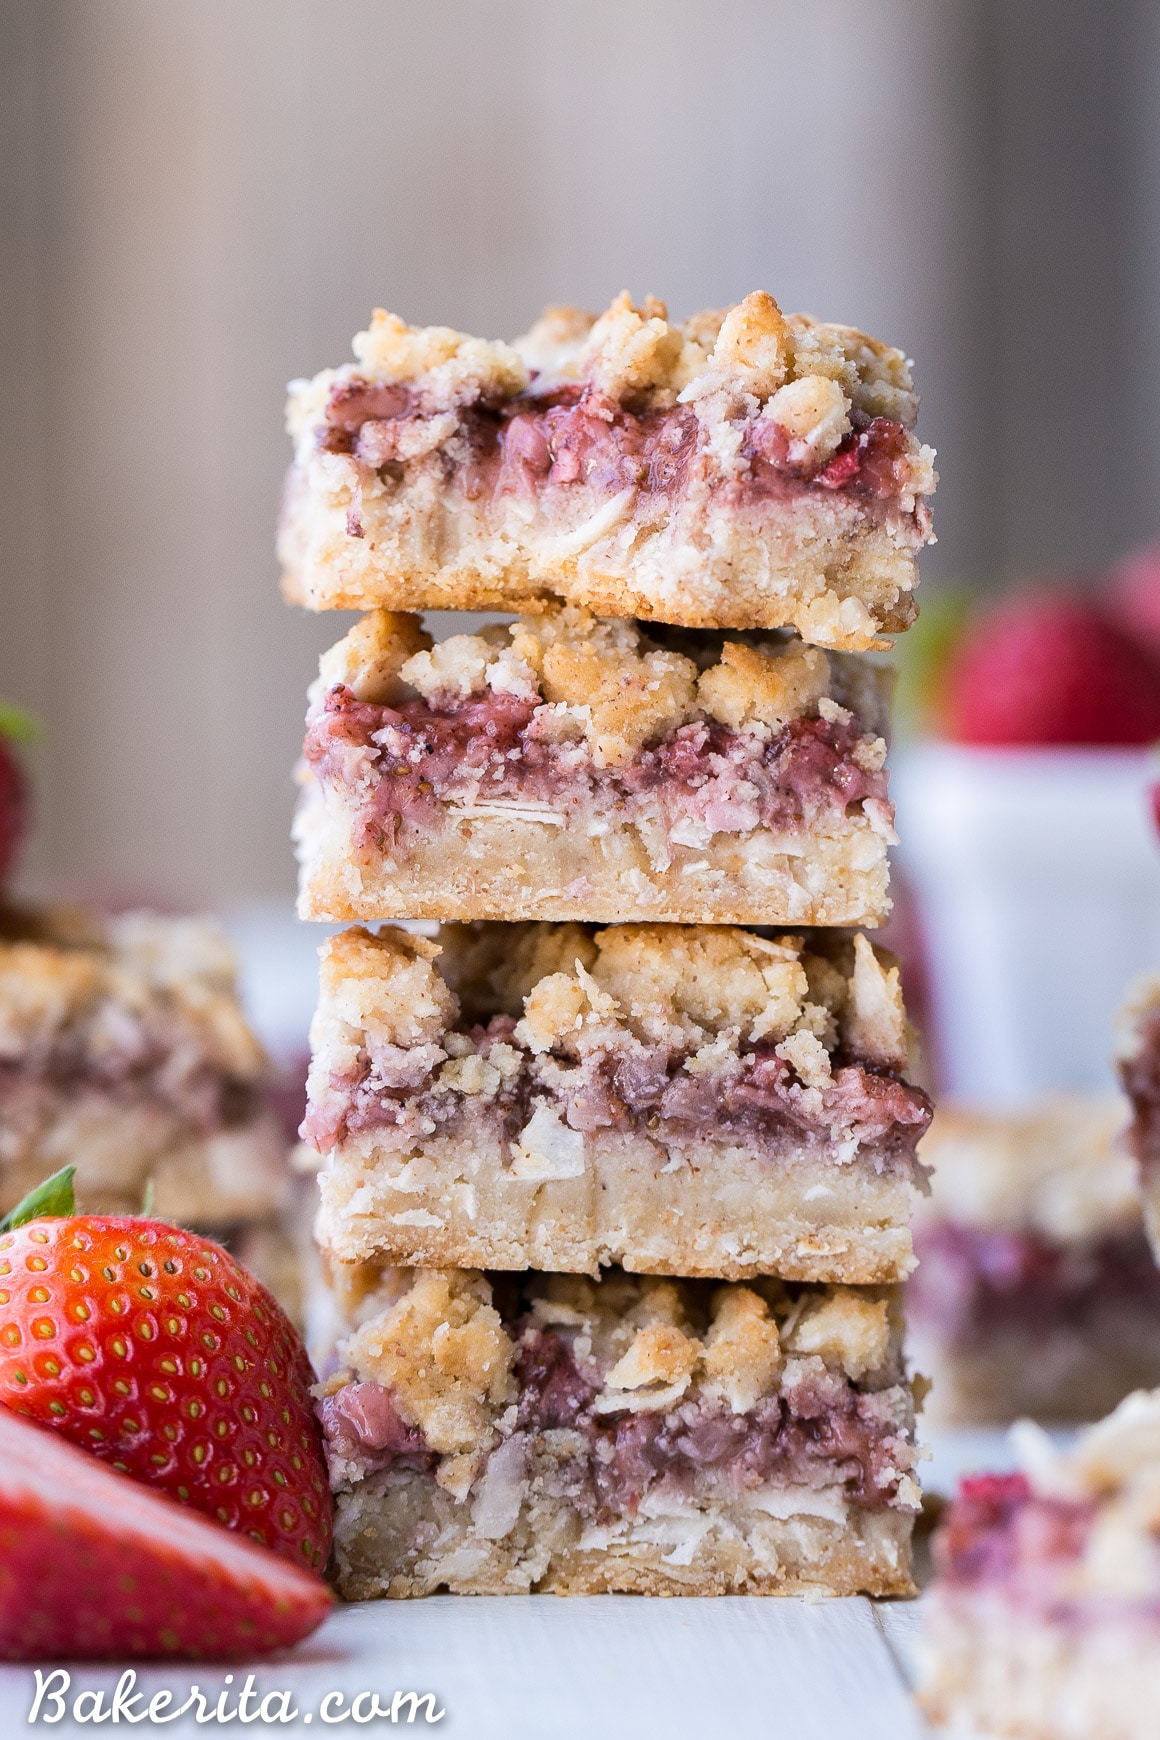 These Strawberry Crumble Bars have an irresistible crust and crumble topping that's full of texture - no oats necessary! These fruity bars are gluten-free, paleo, and vegan.